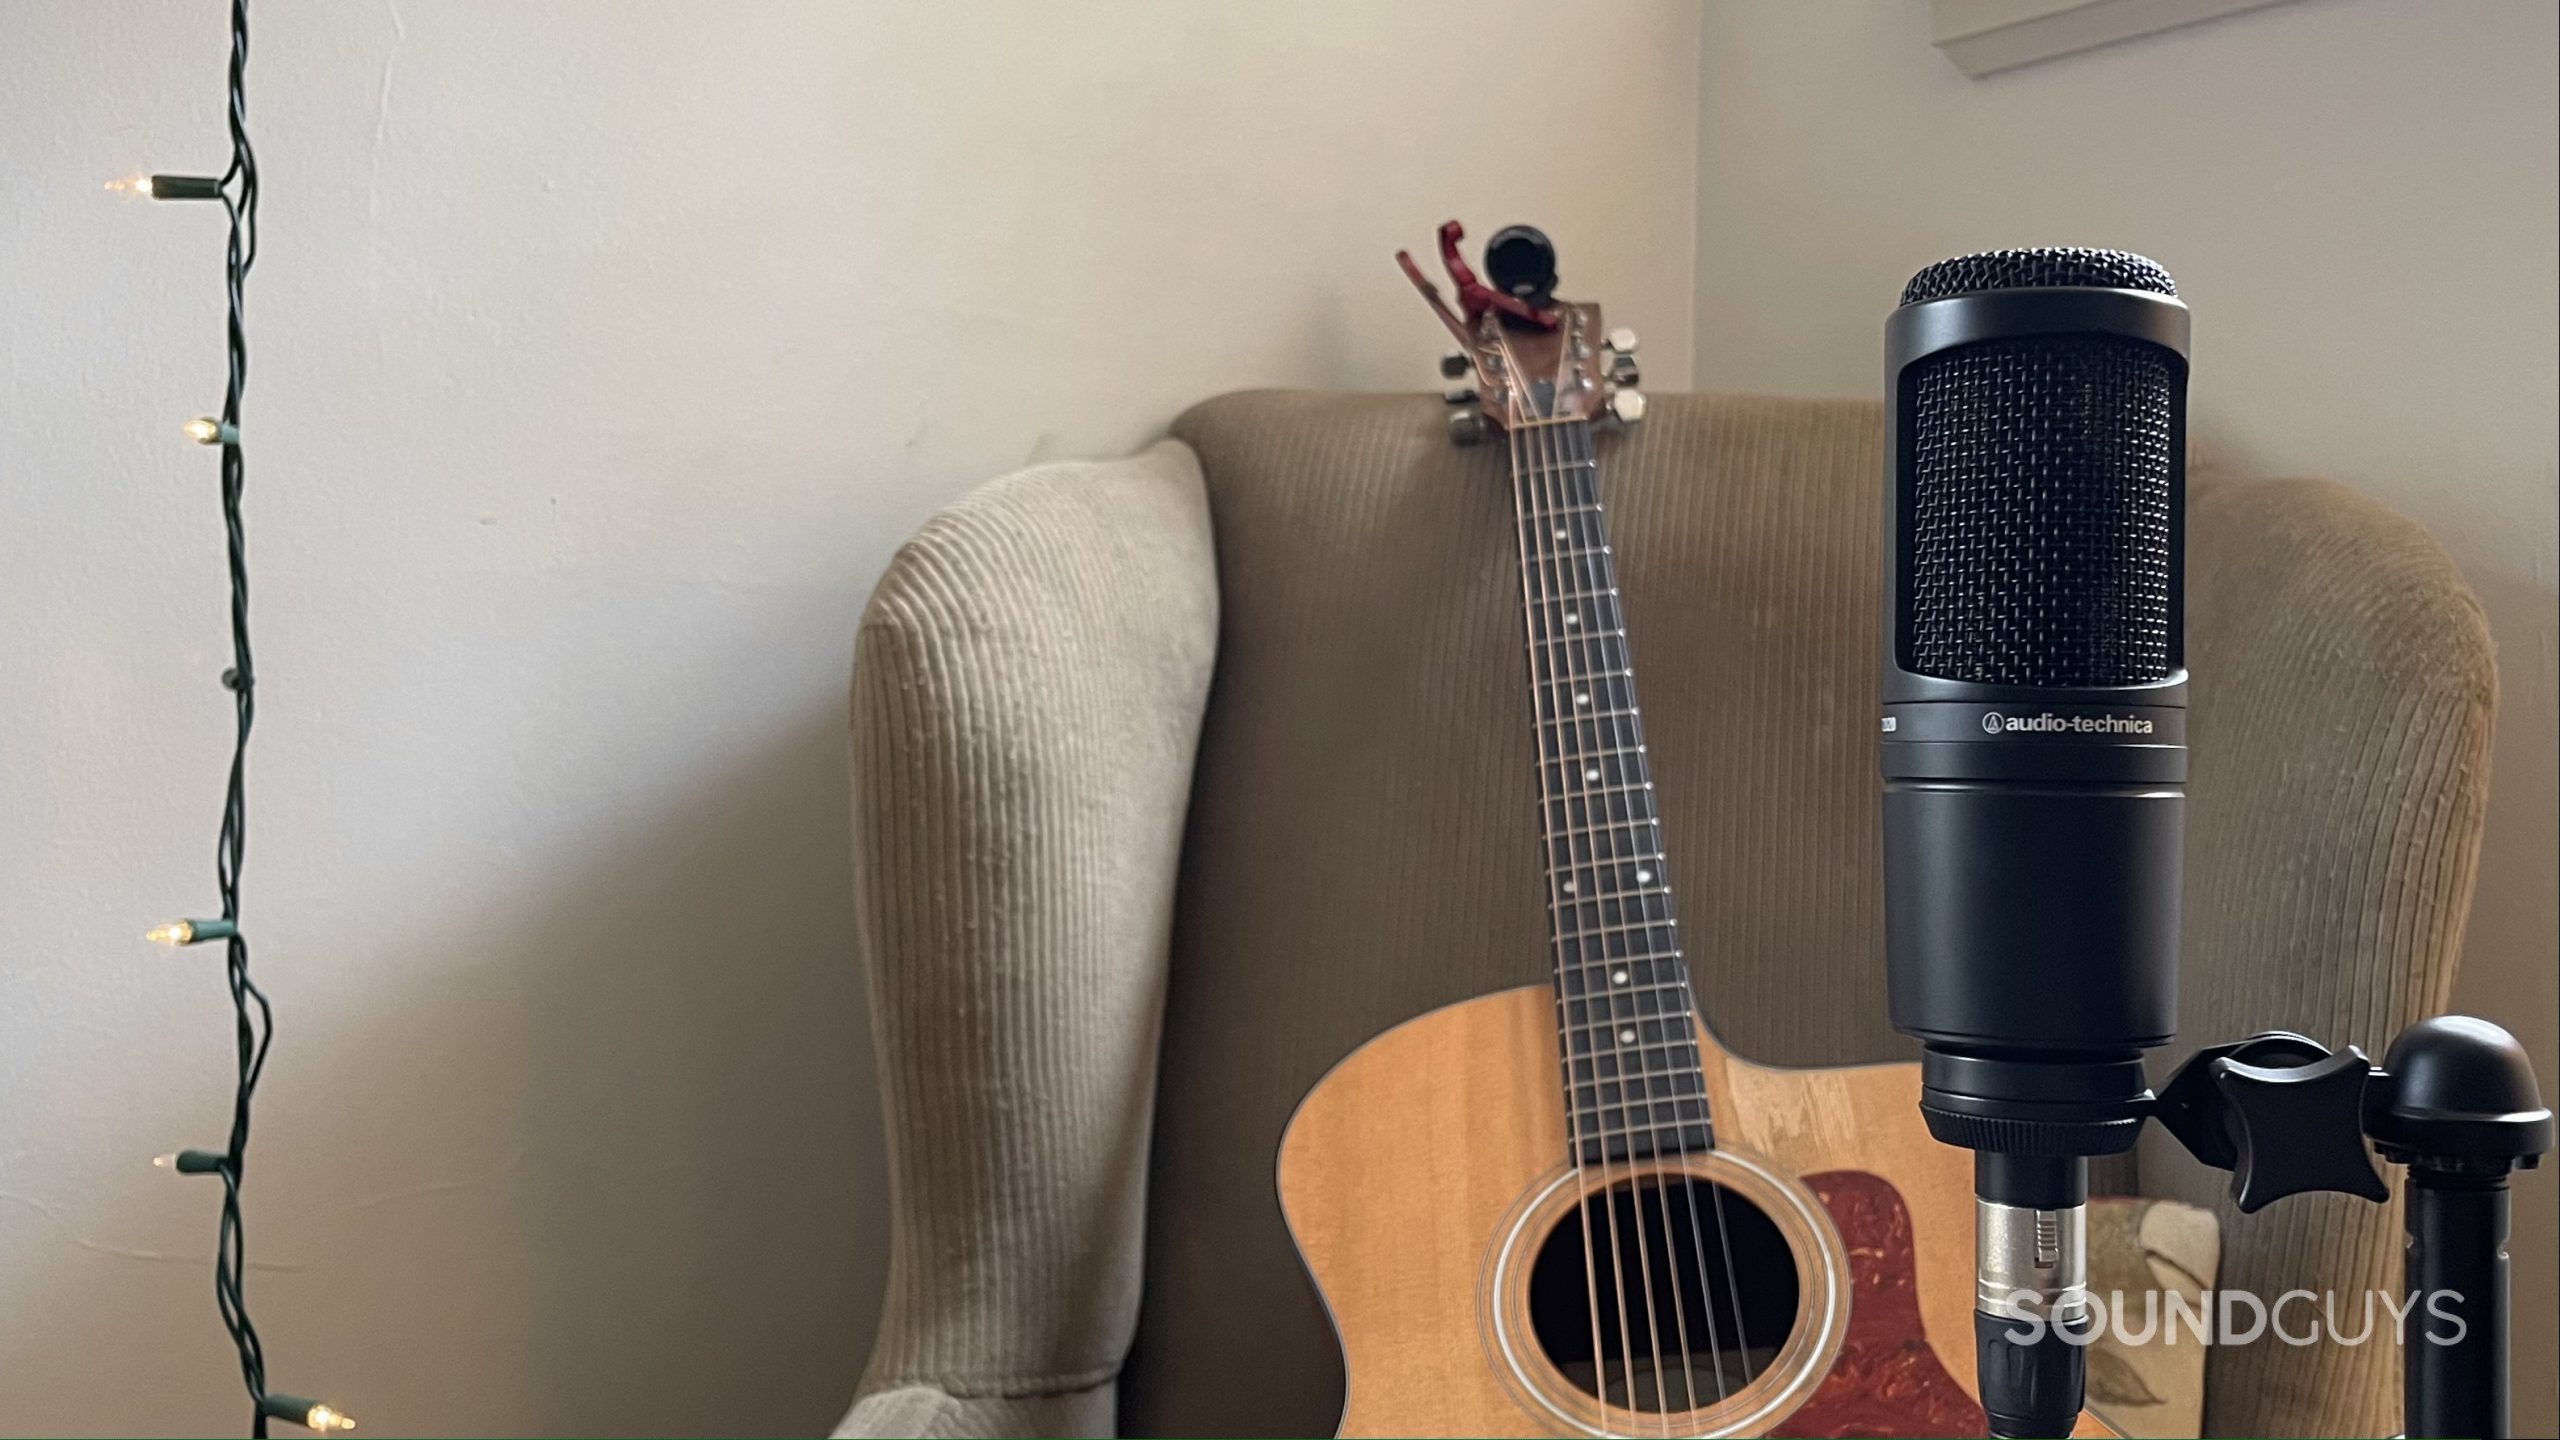 Audio-Technica AT2020 with a string of lights and acoustic guitar resting on an armchair in the background.